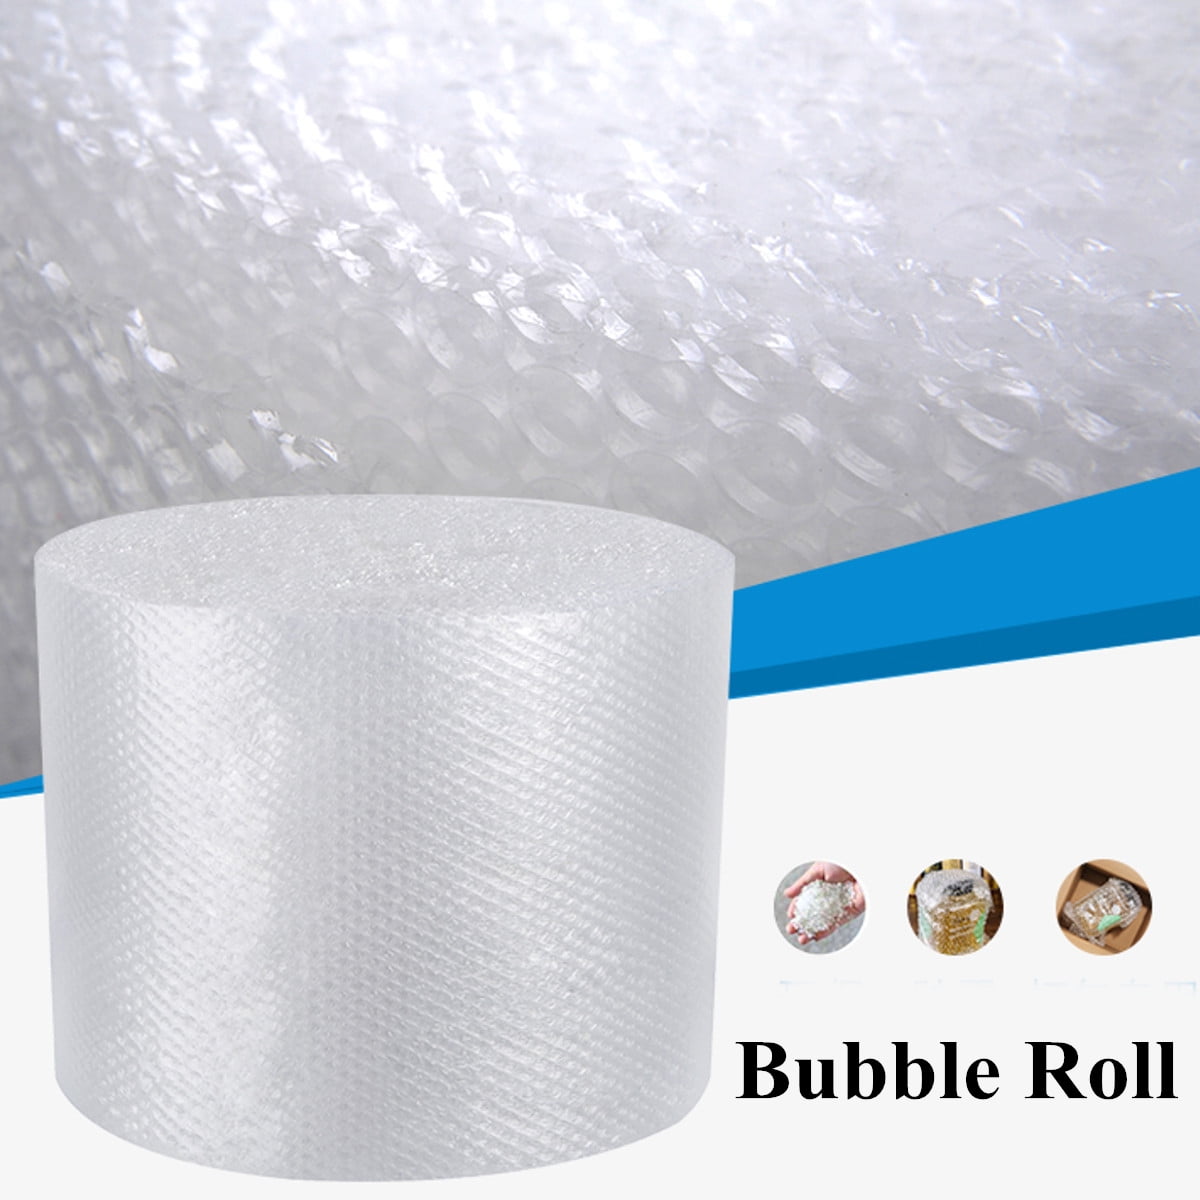 air bubble roll